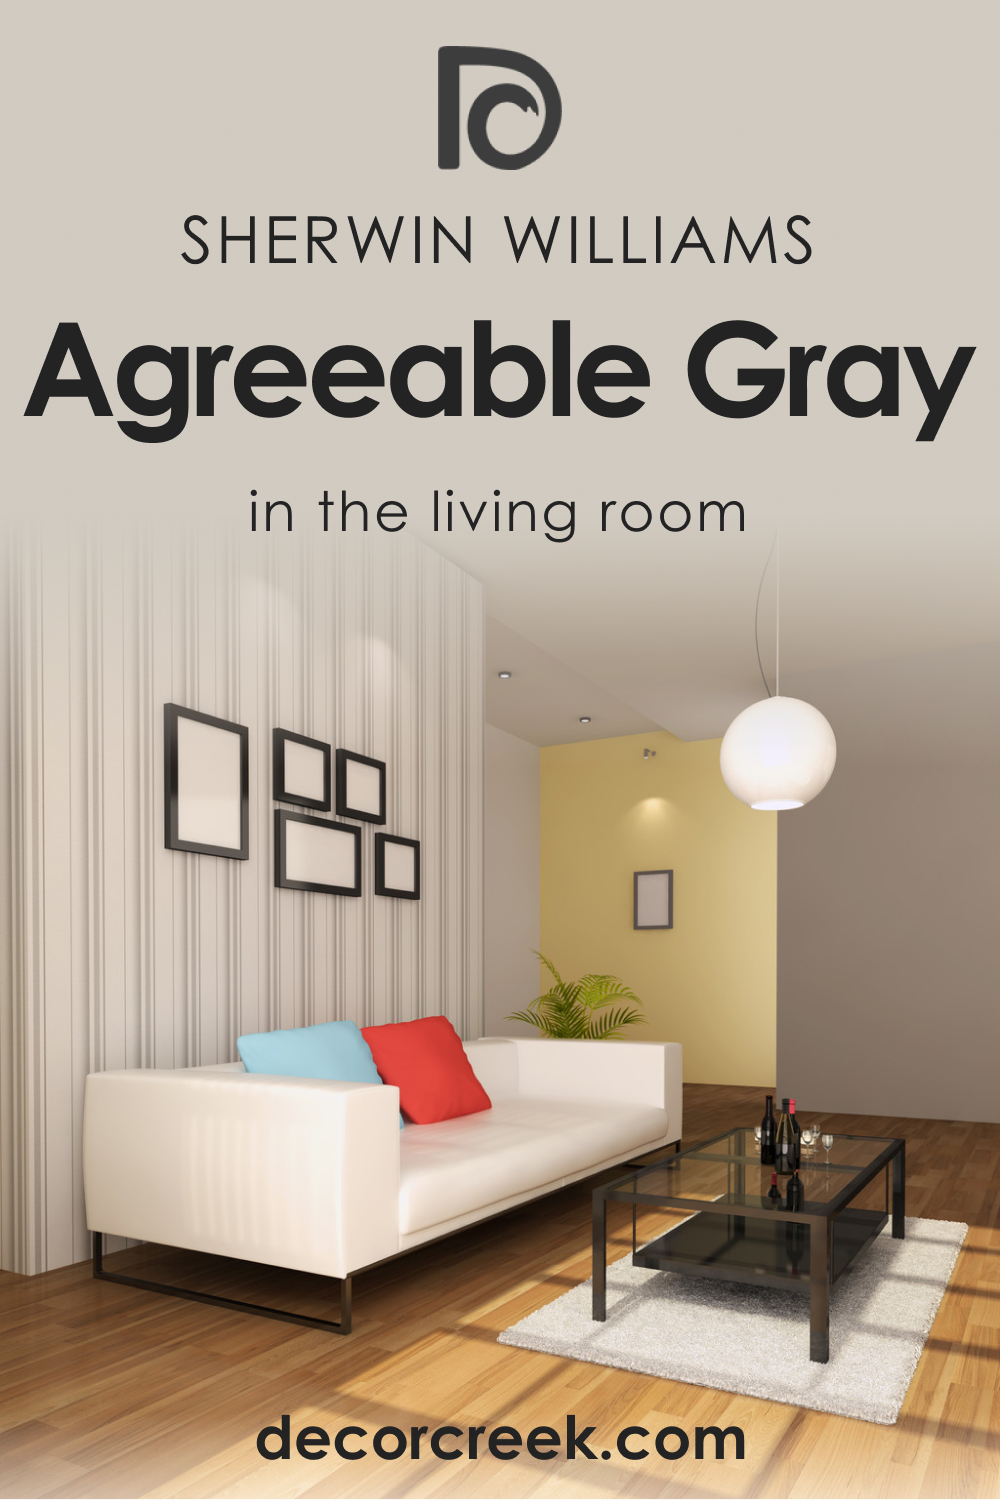 How to Use SW 7029 Agreeable Gray in the Living Room?